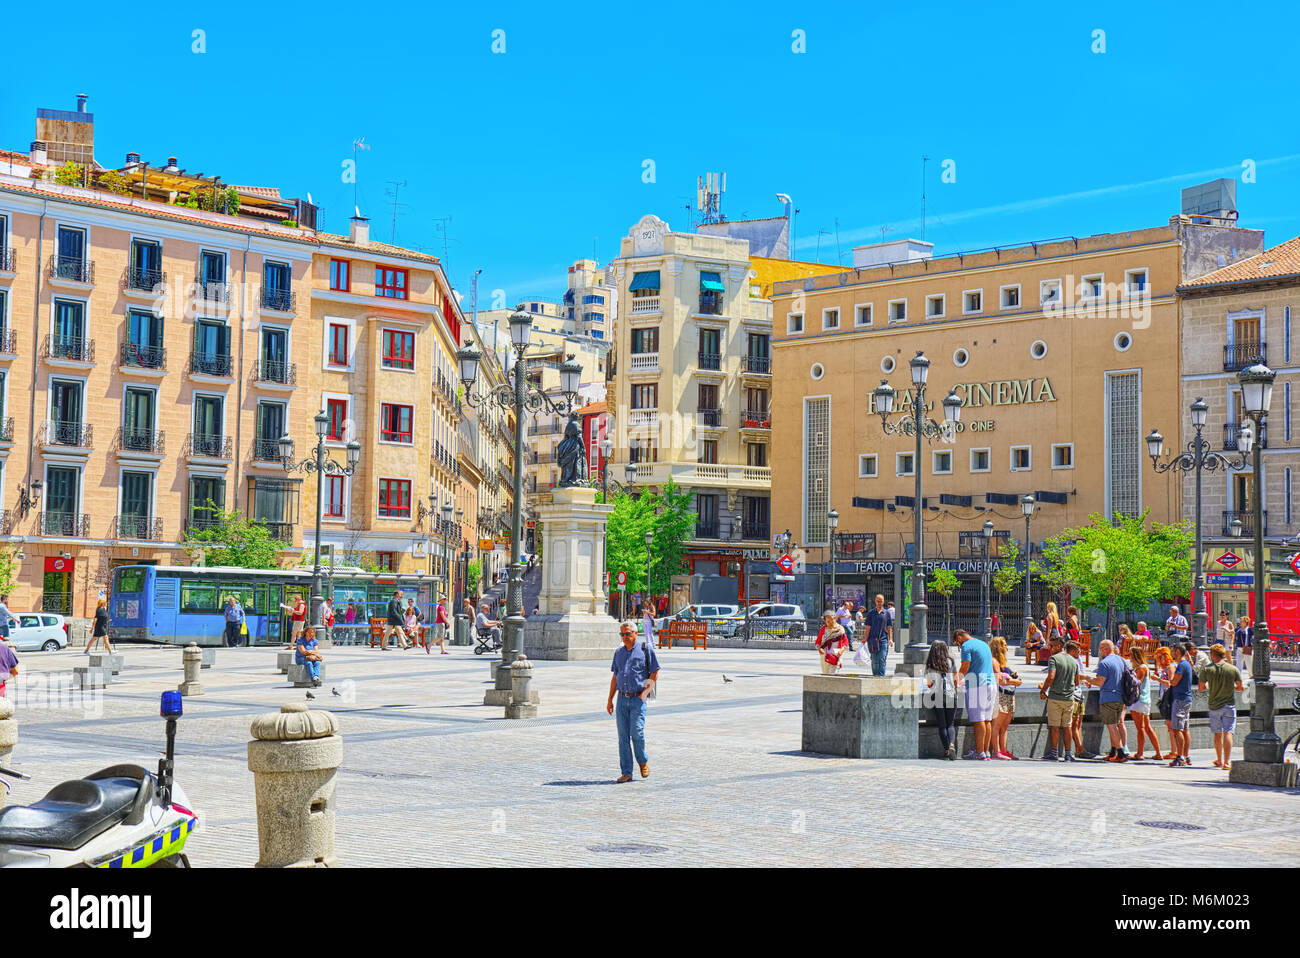 Madrid, Spain- June 06, 2017: Plaza de Isabel II with tourists and people. Madrid-capital of Spain and one of the most beautiful cities in the world. Stock Photo